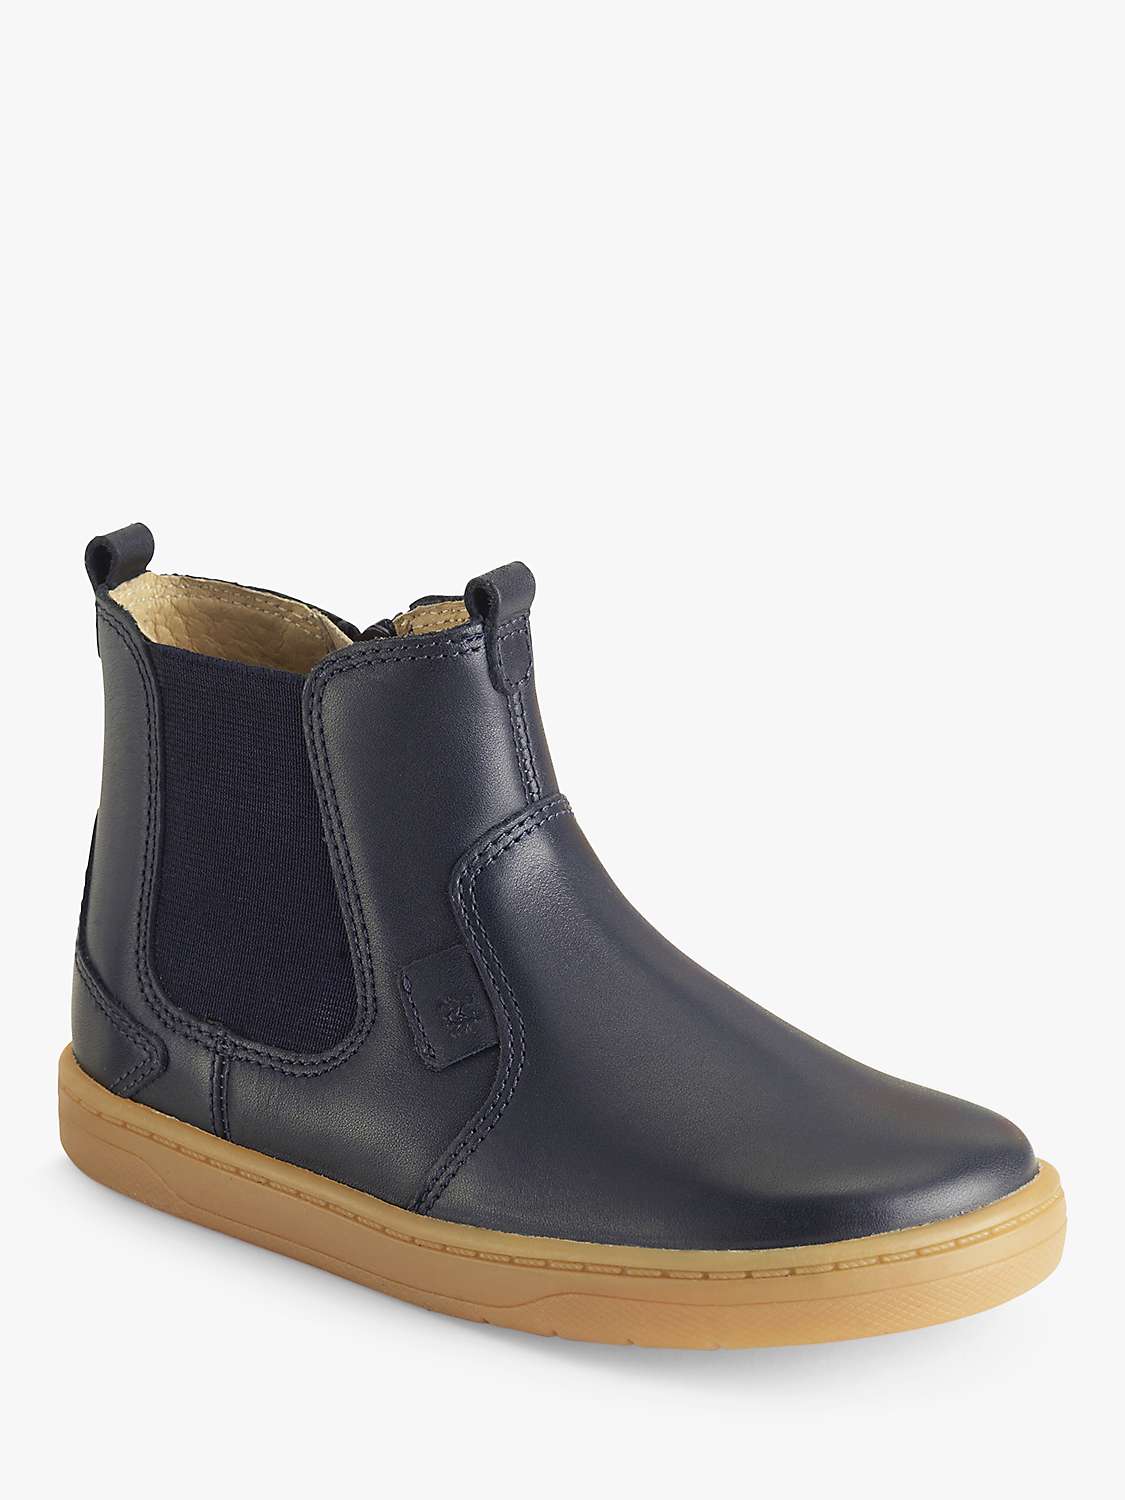 Buy Start-Rite Kids' Energy Ankle Boots, Navy Online at johnlewis.com